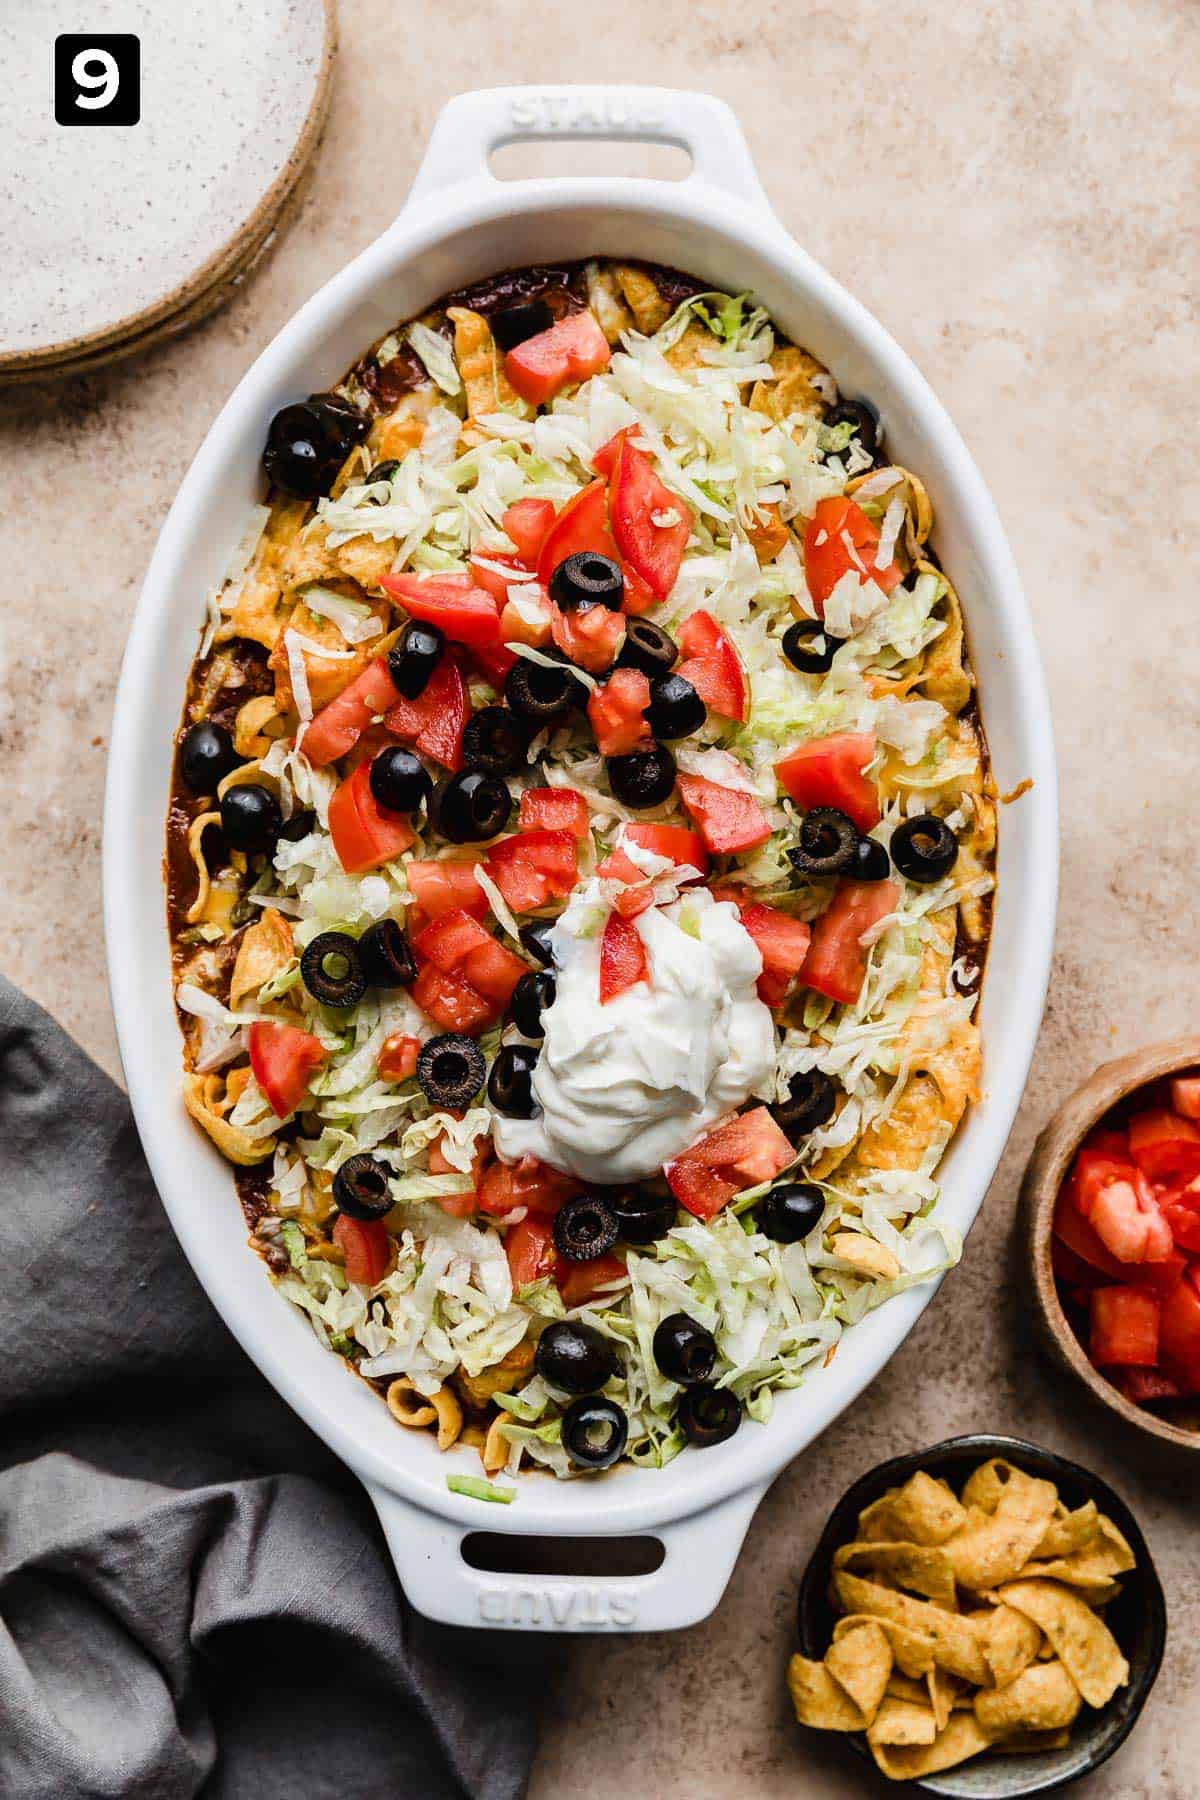 A white oval baking dish filled with a Walking Taco Casserole mixture that's topped with shredded lettuce, tomatoes, olives, and sour cream.